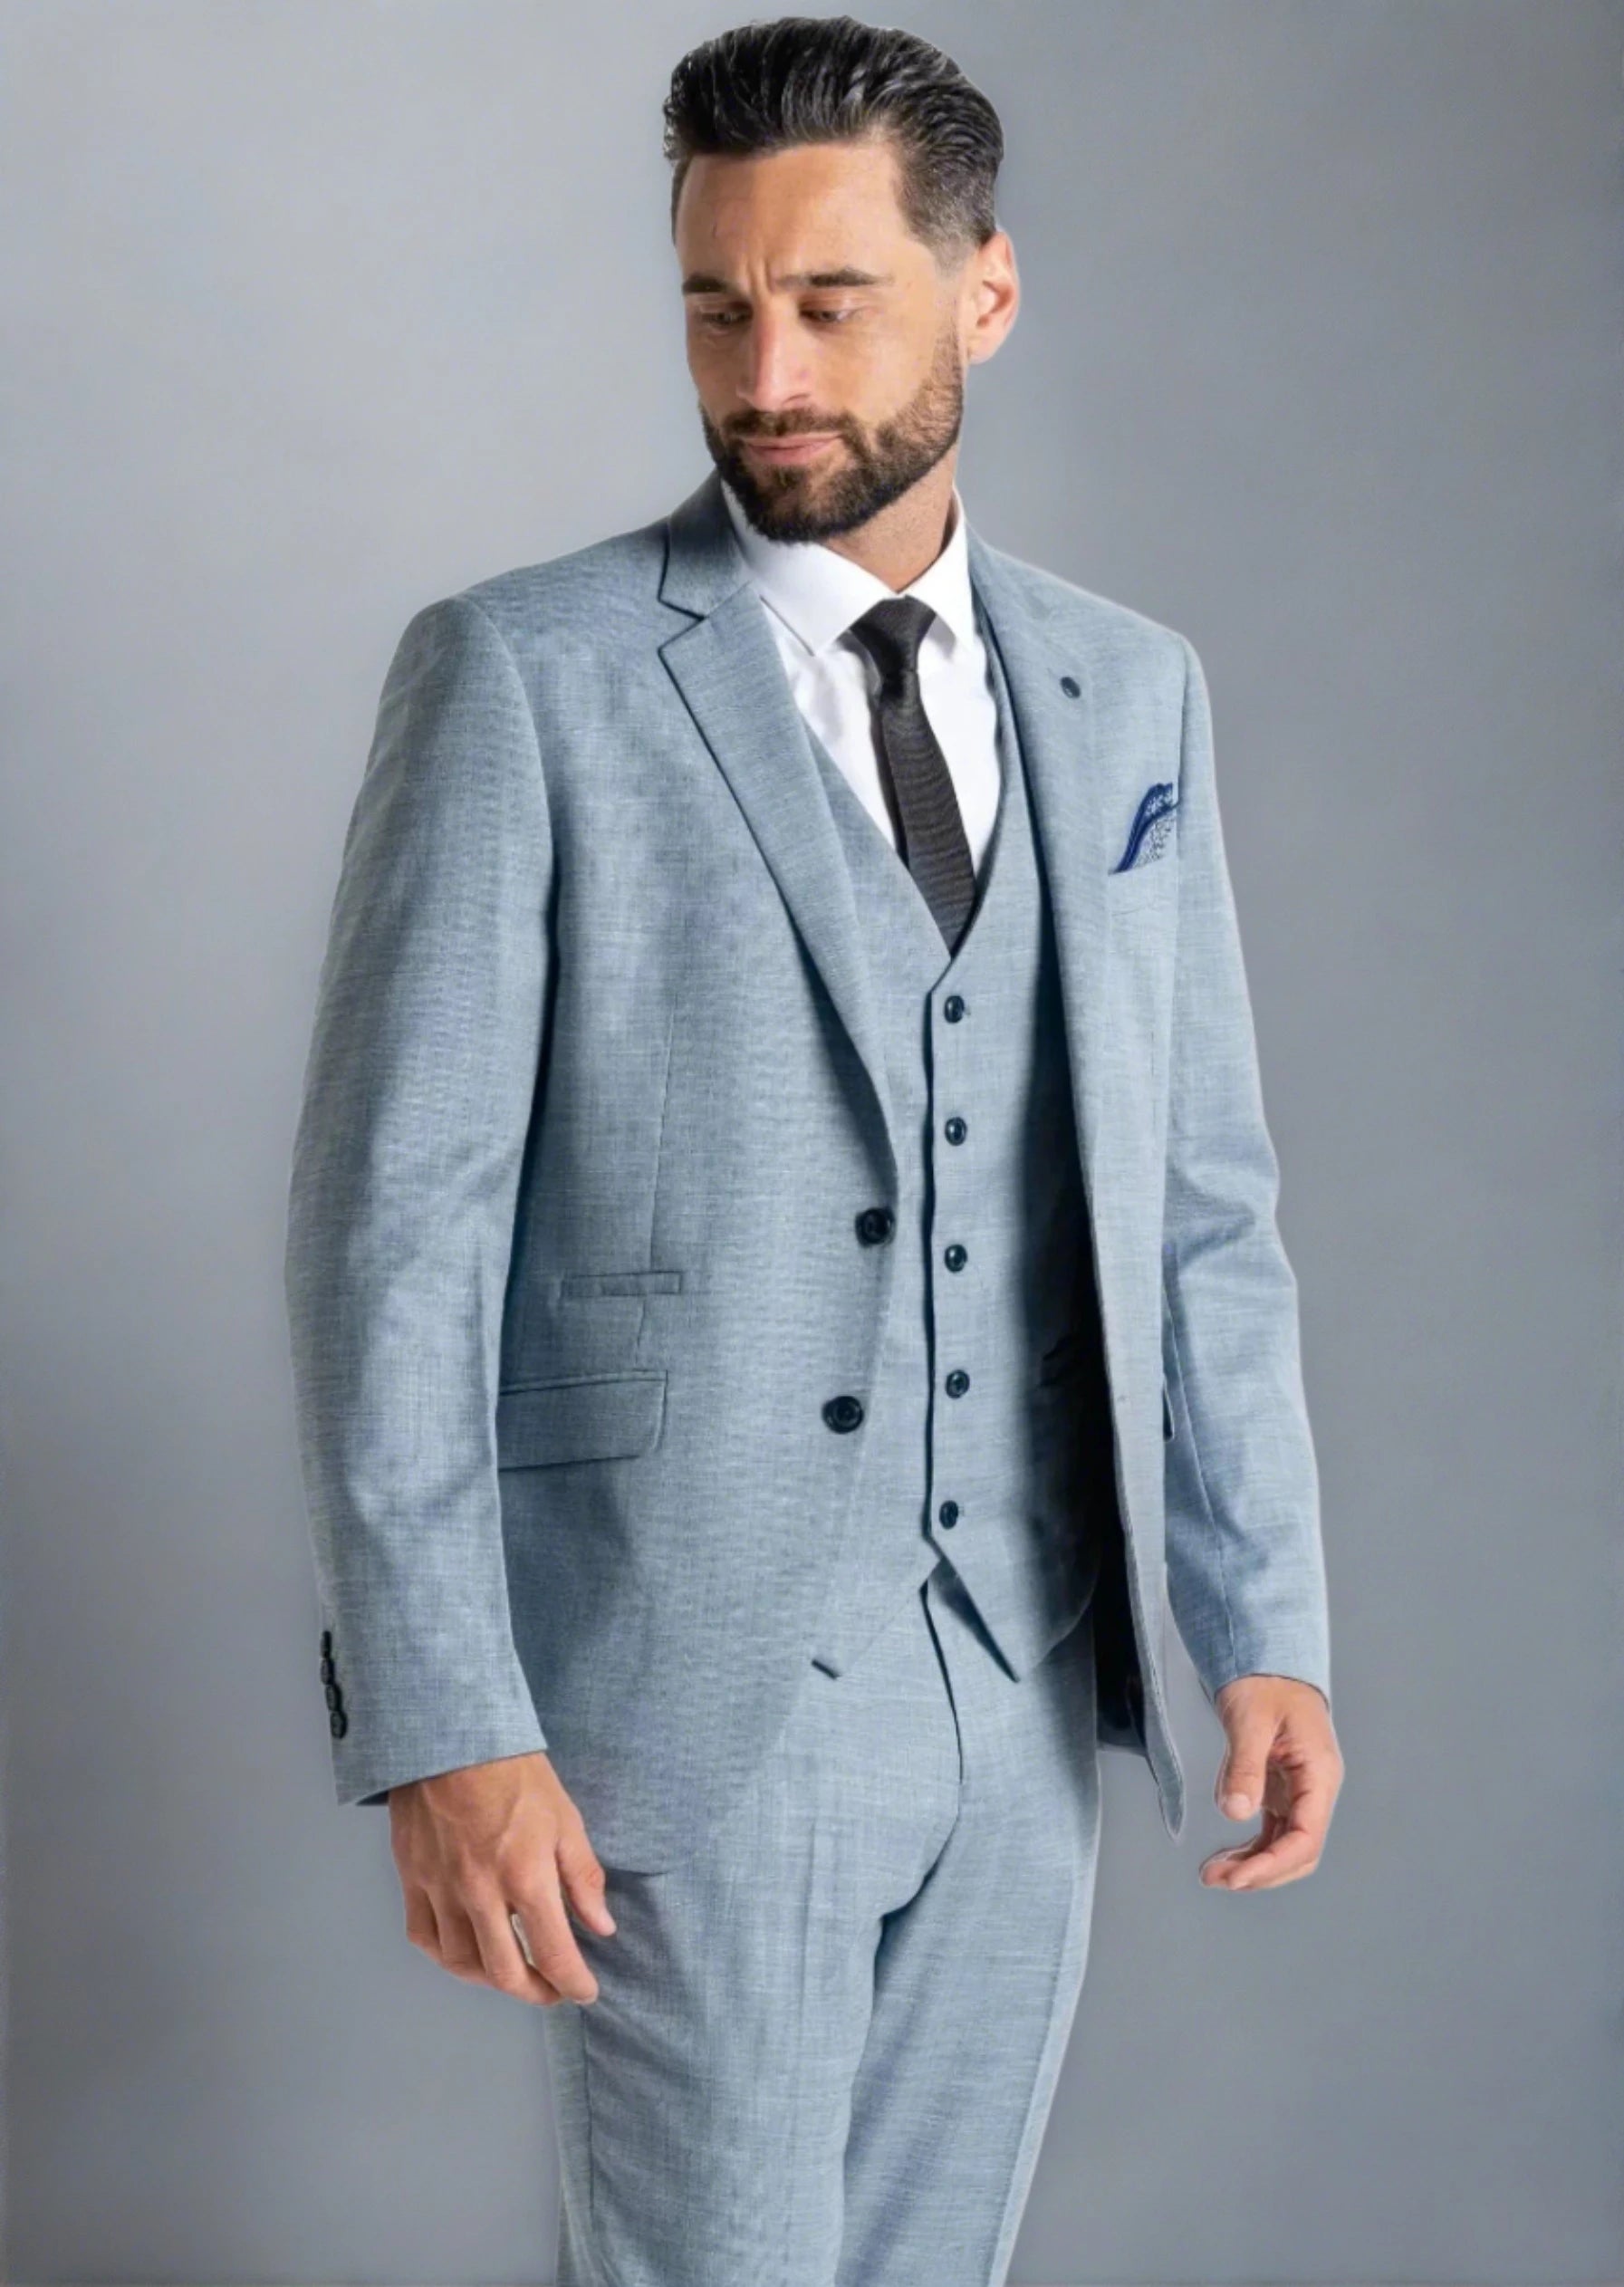 2,000 Pastel blue suit Stock Pictures, Editorial Images and Stock Photos |  Shutterstock